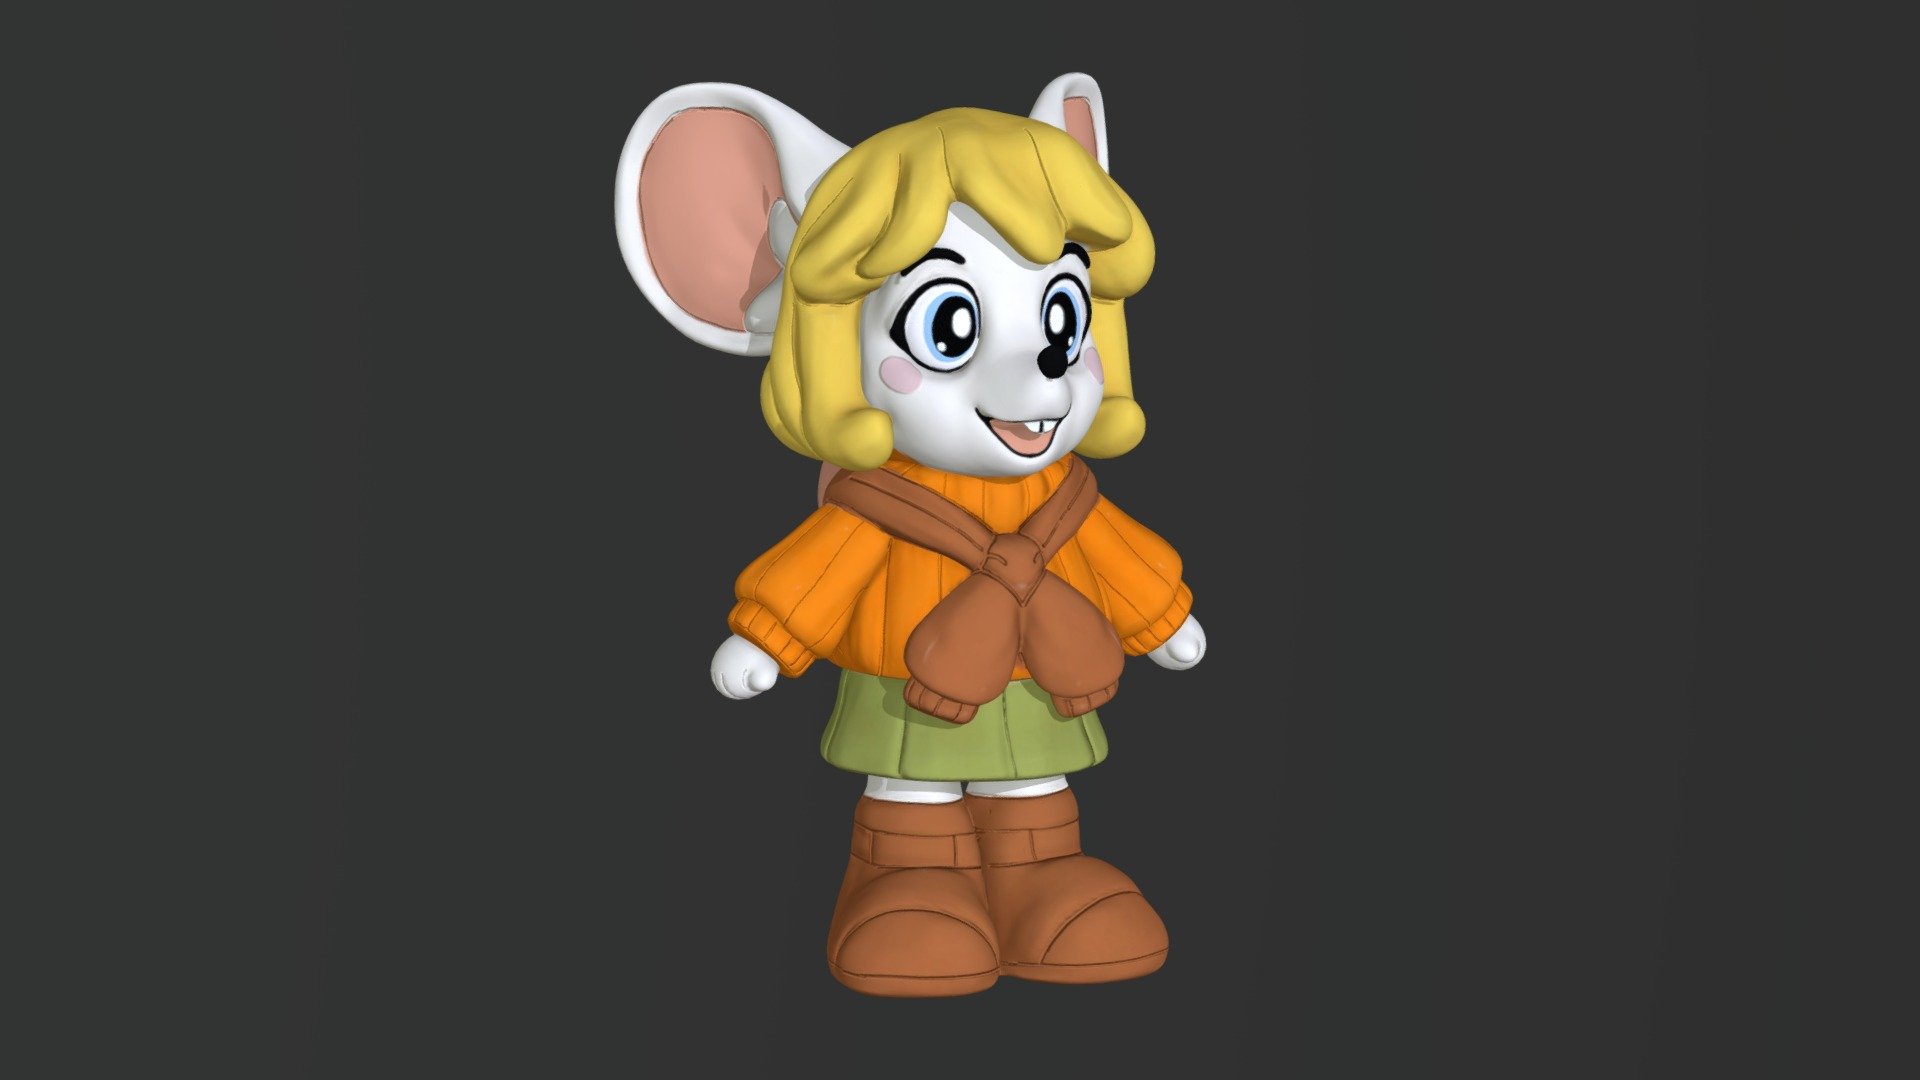 Resident Evil 4 Fans Have Already Added Mouse Ashley Meme Into The Game